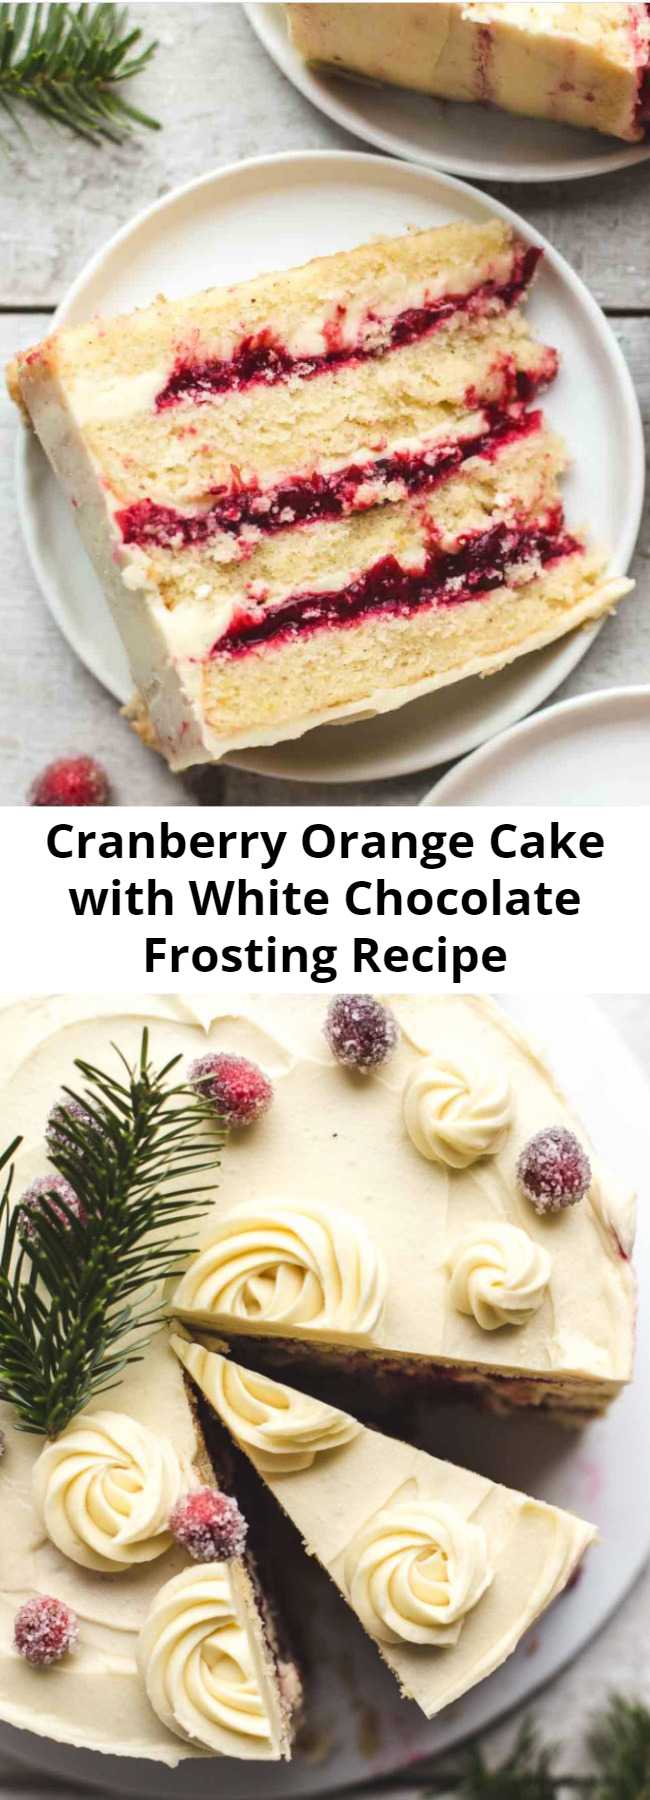 Cranberry Orange Cake with White Chocolate Frosting Recipe - This Cranberry Orange Cake is made of 4 fluffy orange cake layers, a homemade cranberry filling, and a super creamy white chocolate frosting. #buttercream #whitechocolate #chocolate #cranberry #orange #orangecake #cake #christmas #christmascake #dessert